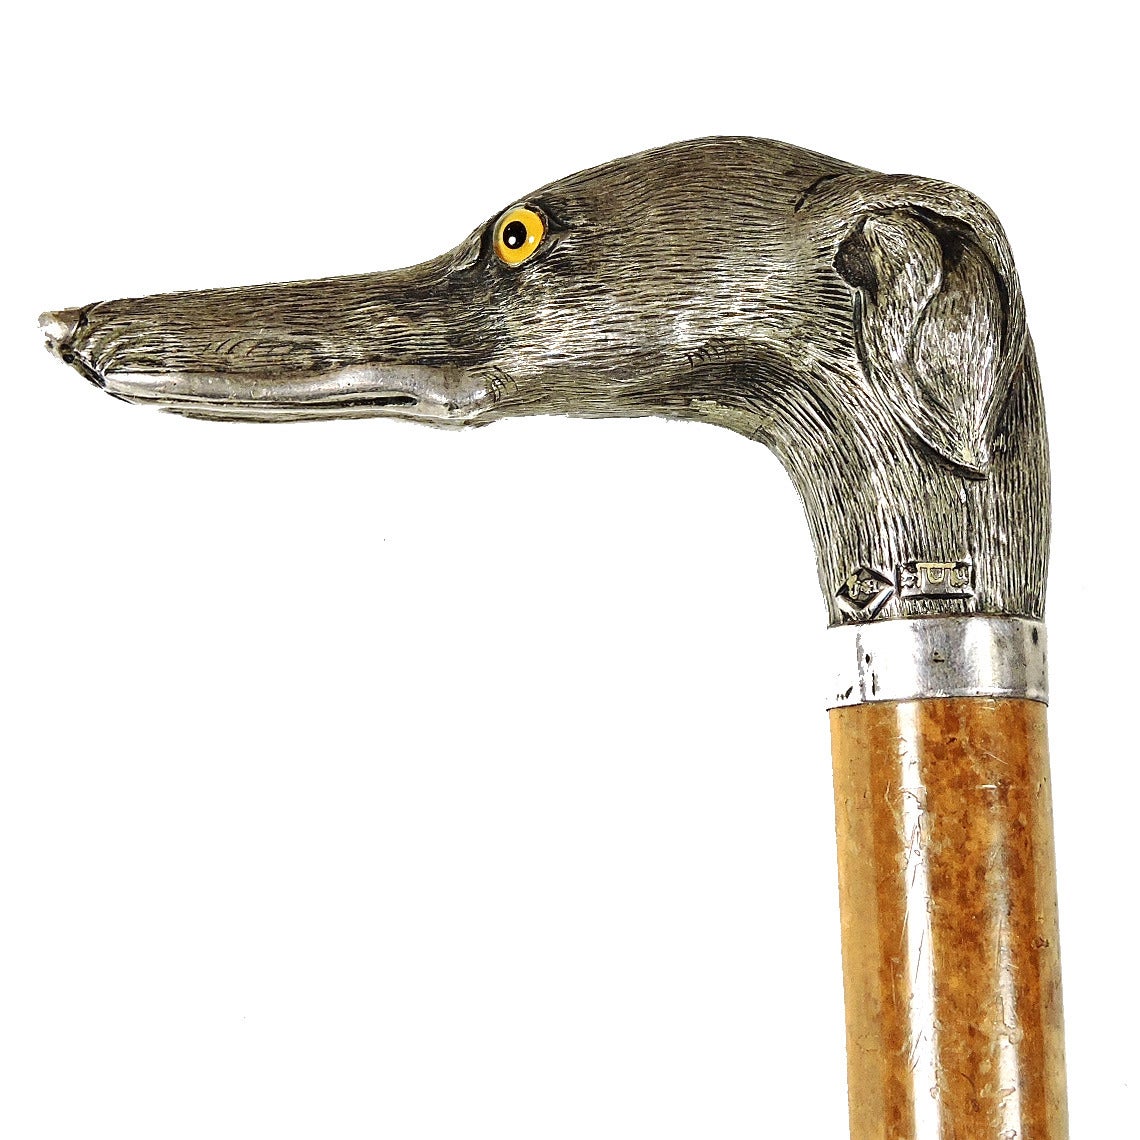 Howell & Co. English silver whippet form walking stick handle, circa 1914-1915, bearing silver marks for Jonathan Howell, London. Fanciful whippet head with glass eyes mounted on a short wood post. 
Measures: Silver: 4 x 2 x 1 1/4 inches, overall: